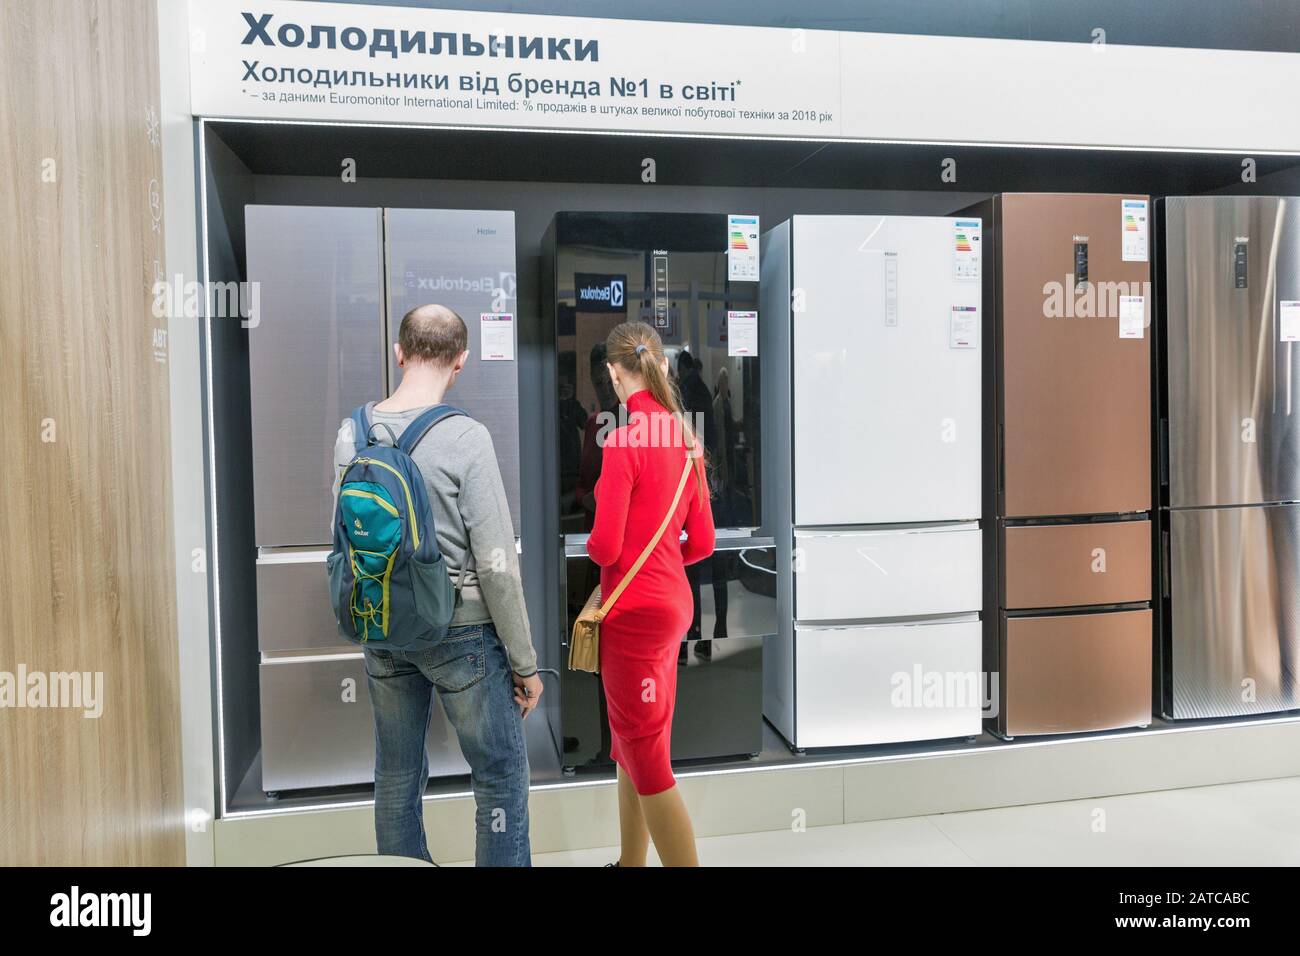 KYIV, UKRAINE - APRIL 06, 2019: People visit Haier booth, a multinational home appliances and consumer electronics company, at CEE 2019, the largest e Stock Photo